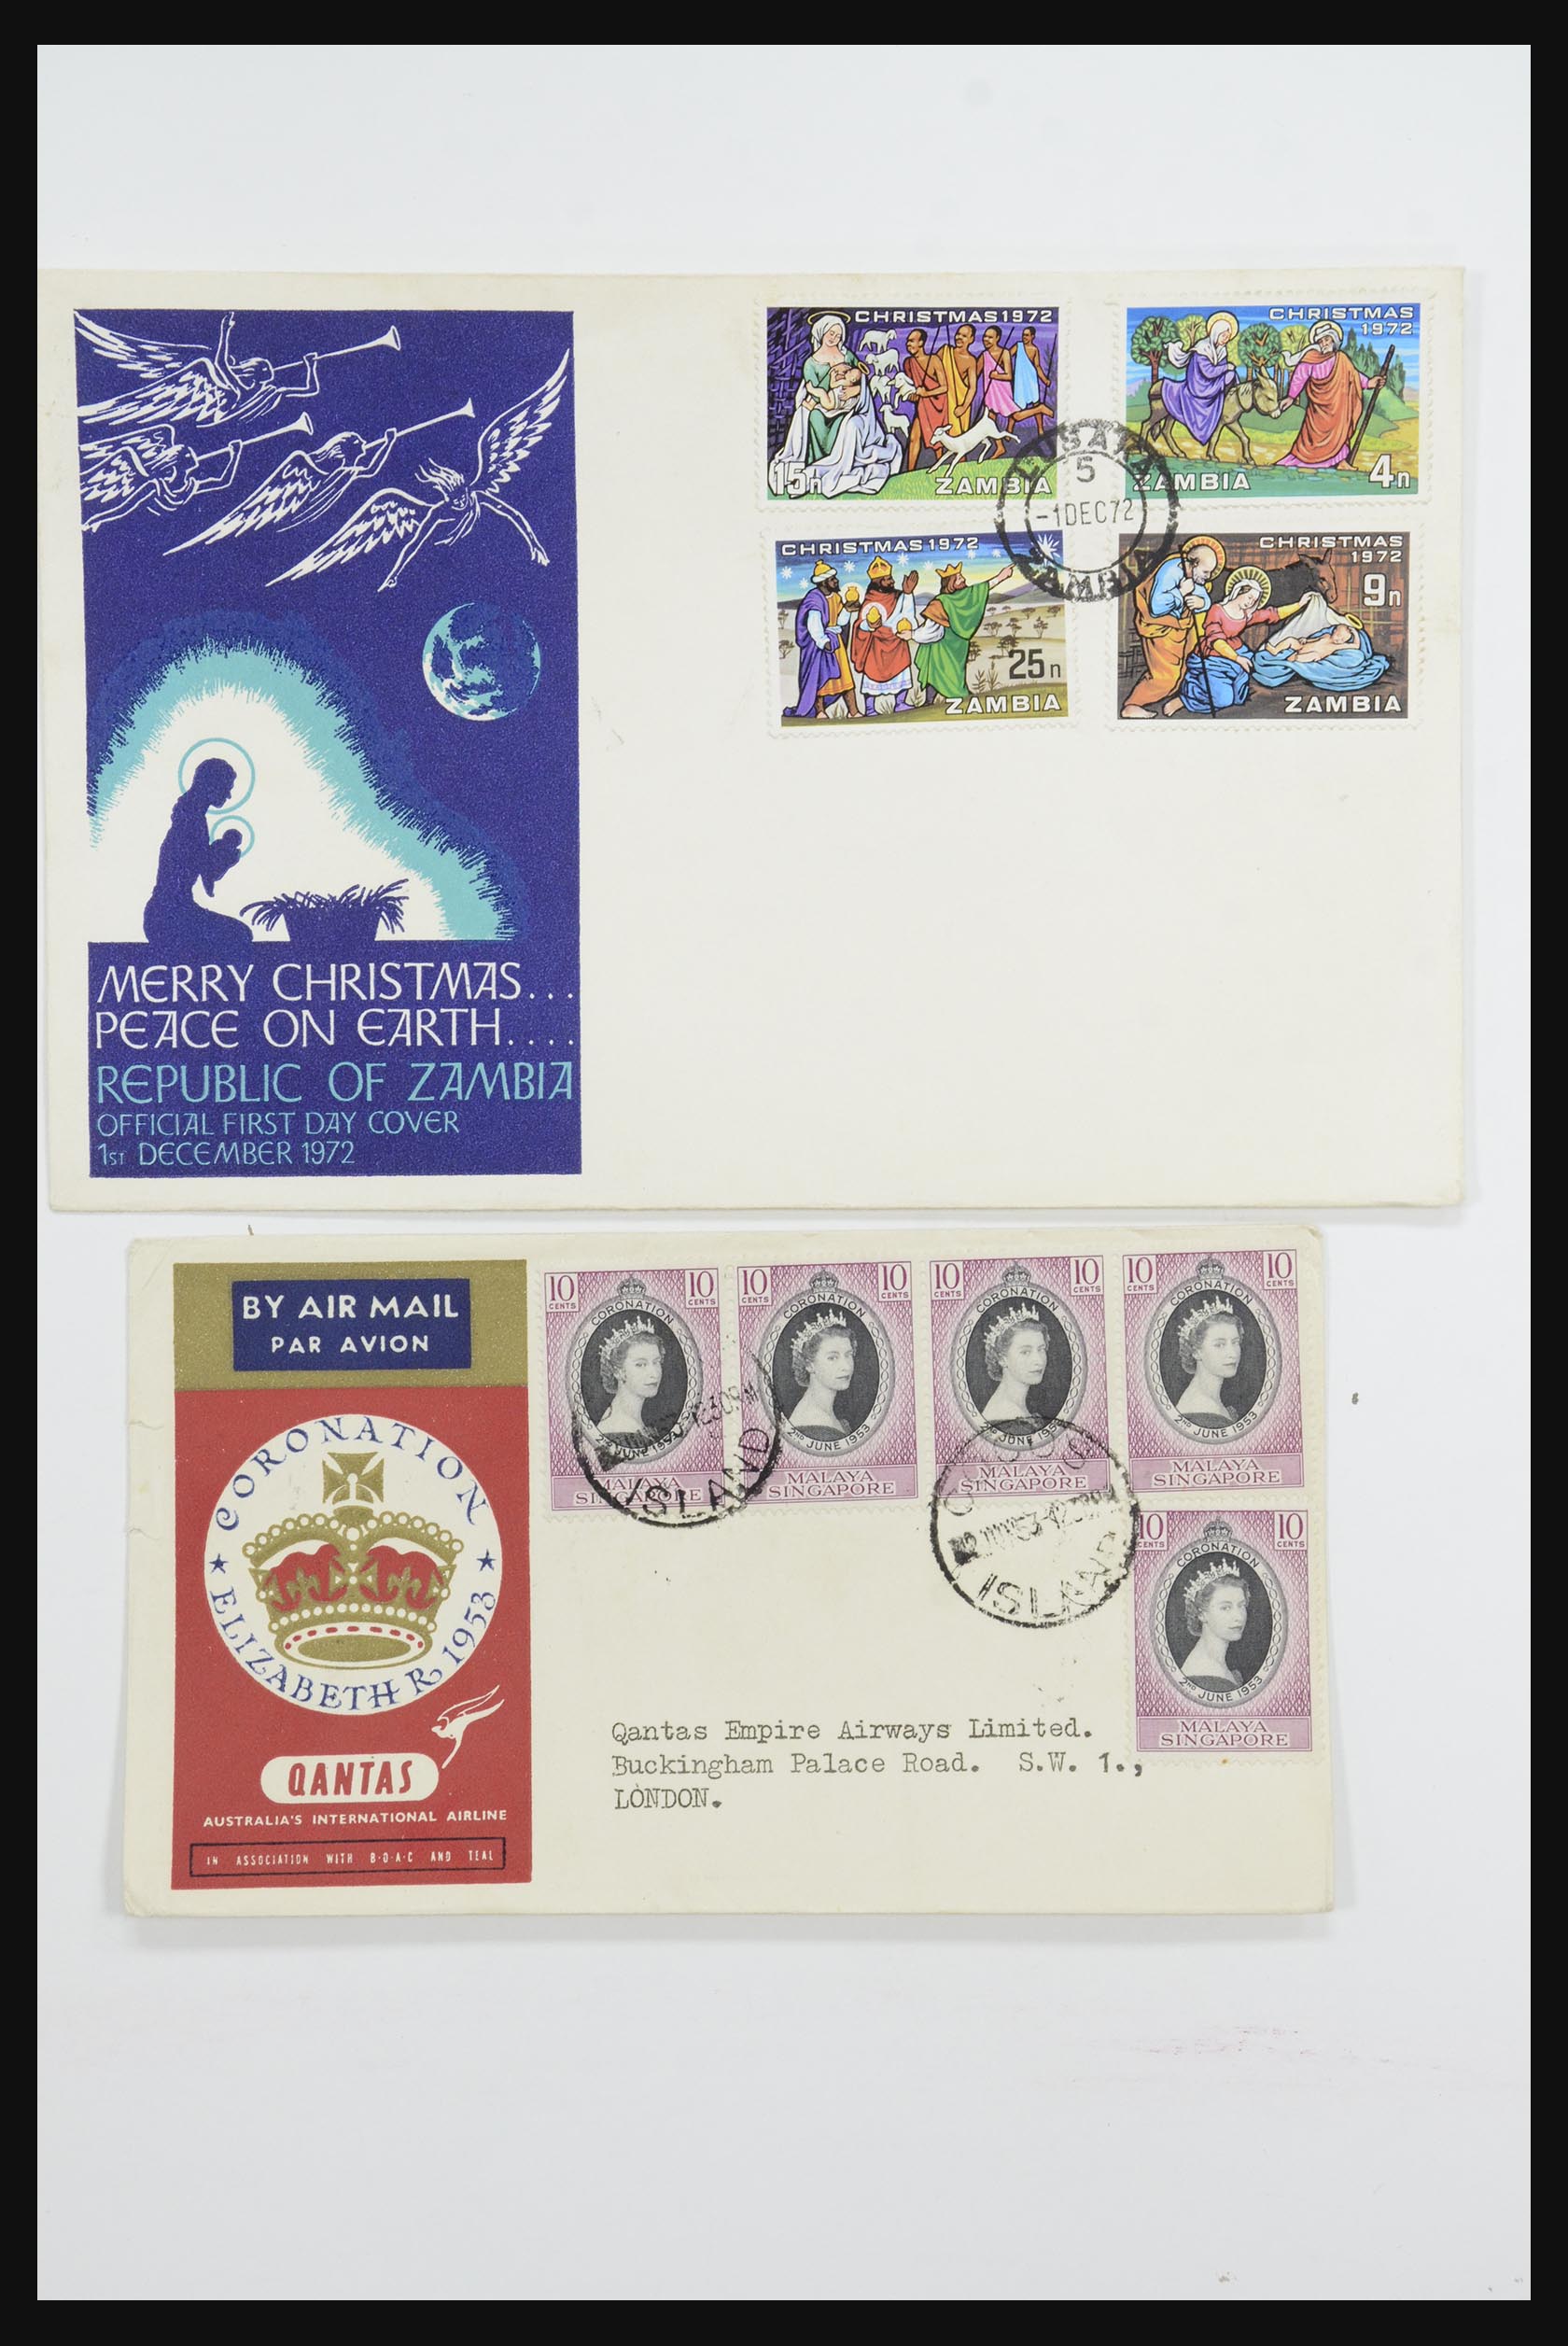 31726 011 - 31726 Great Britain and colonies covers and FDC's 1937-2001.